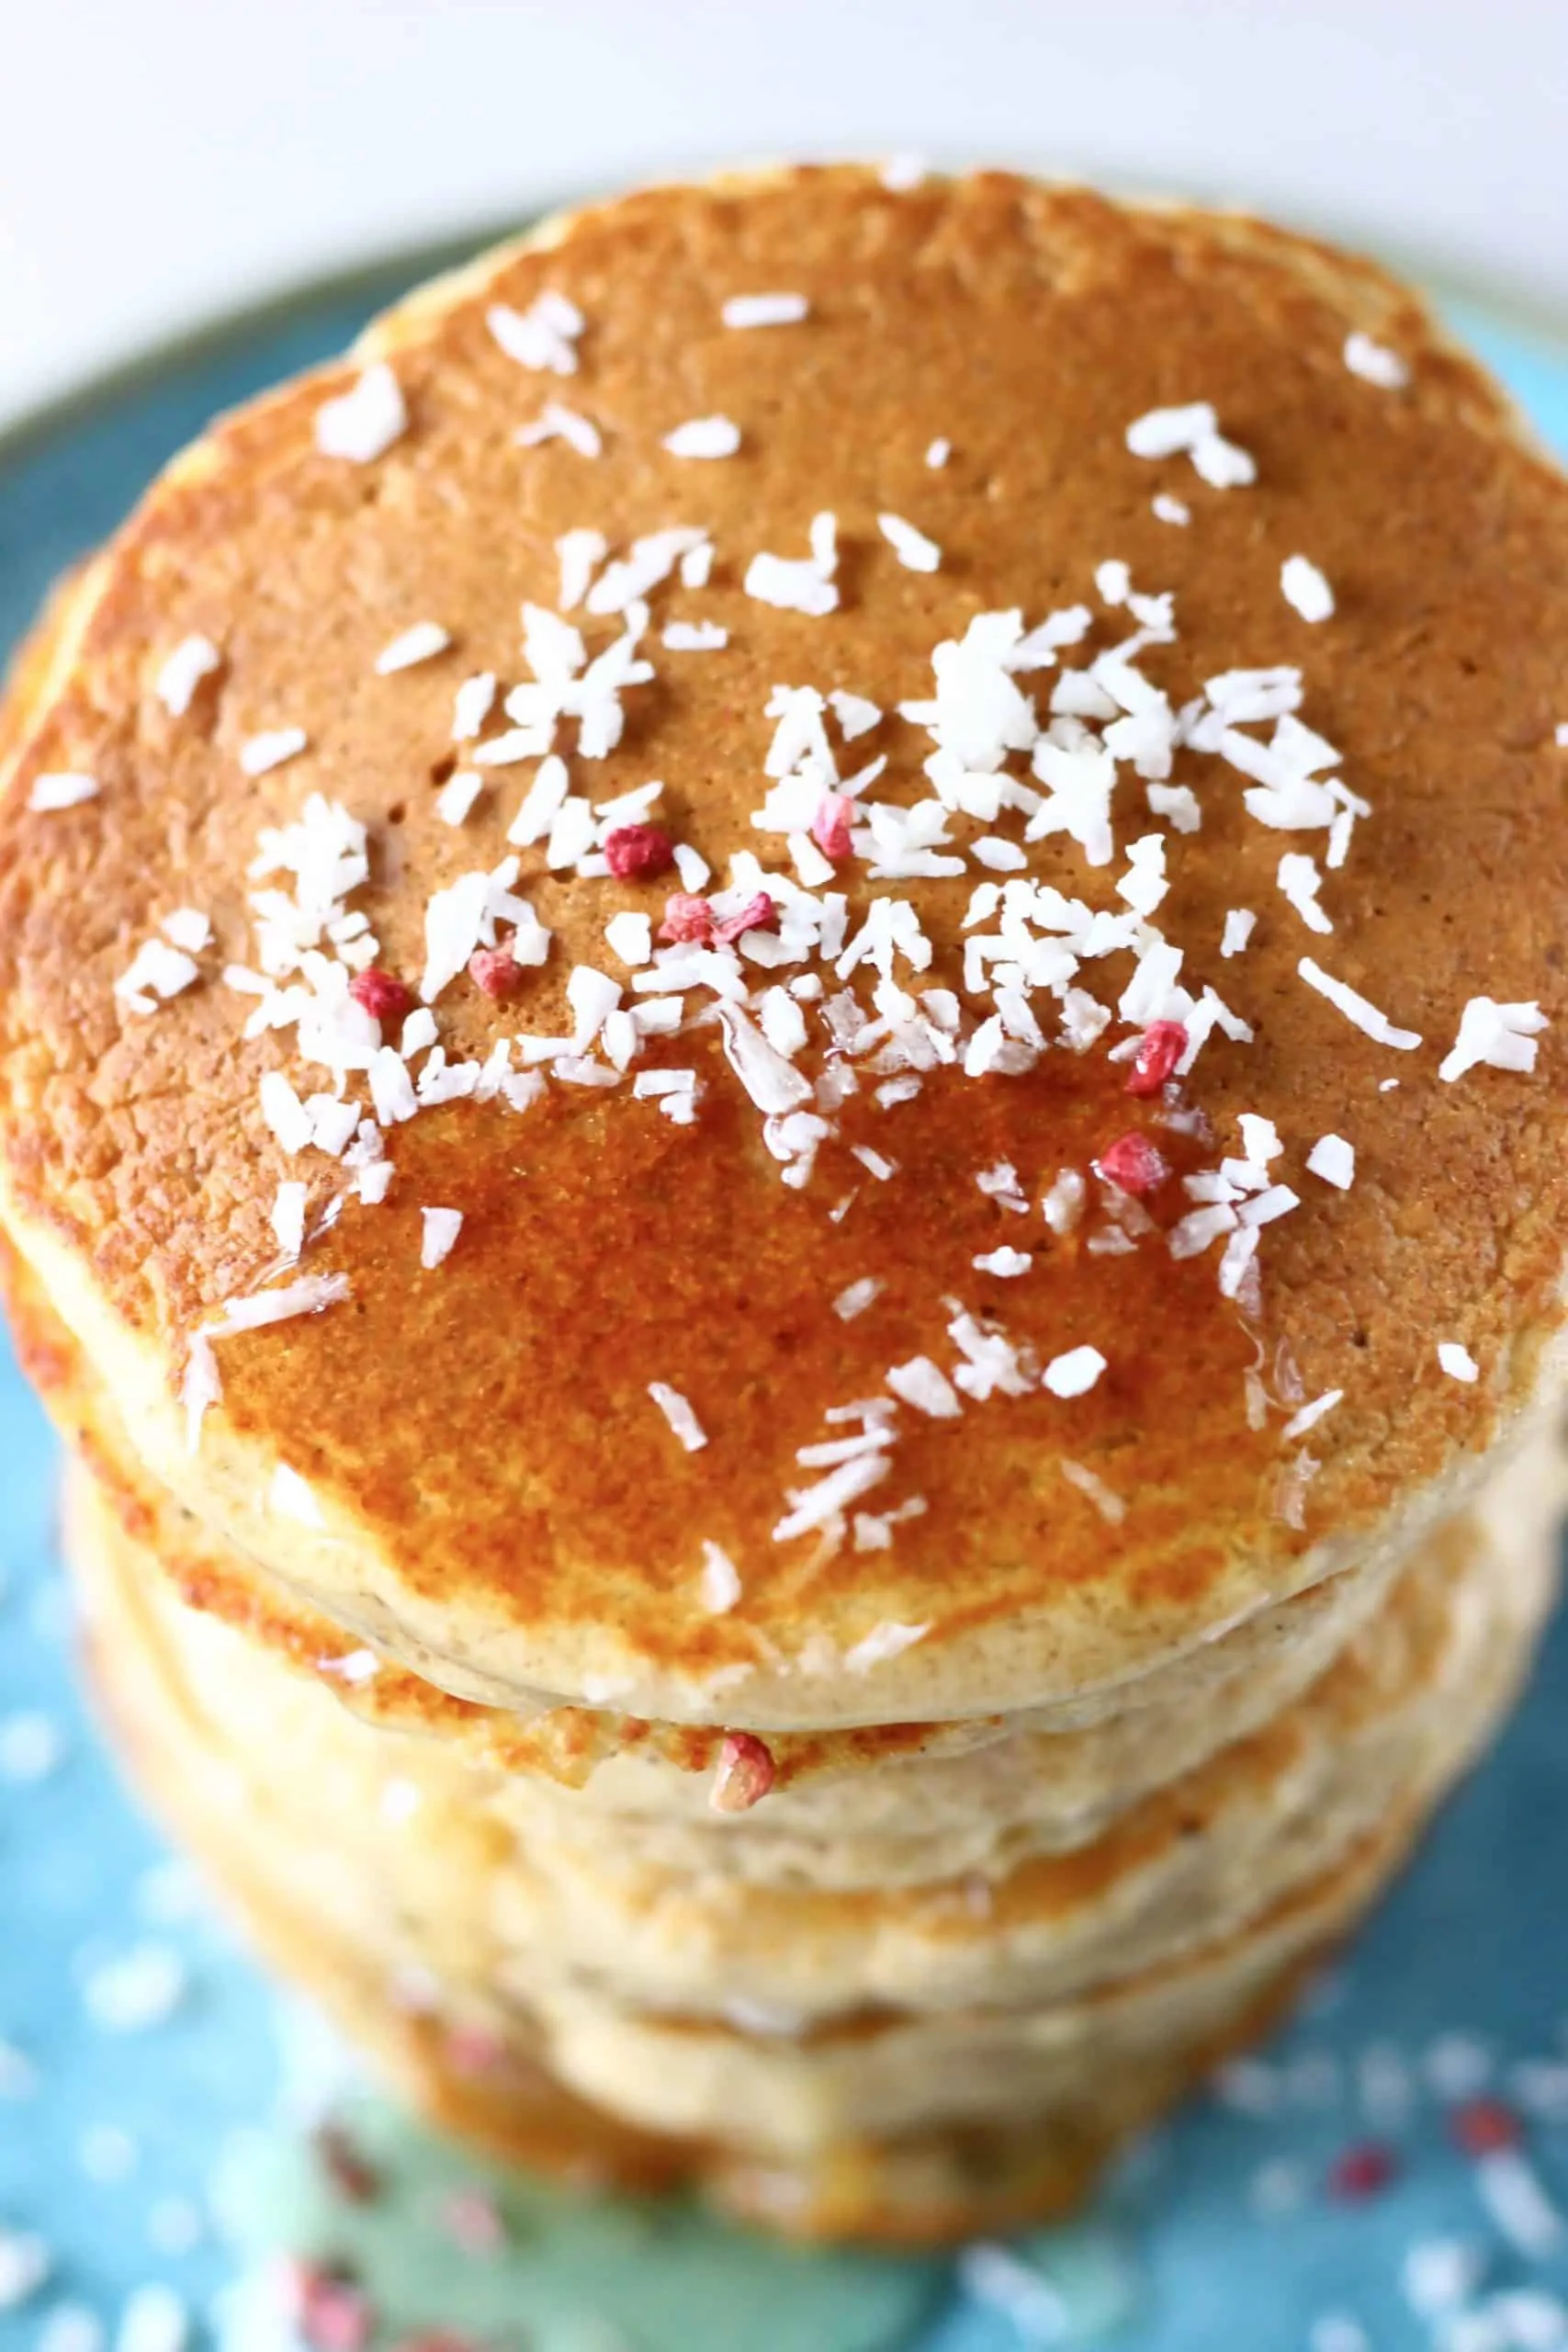 A stack of golden brown pancakes topped with desiccated coconut and syrup on a blue plate